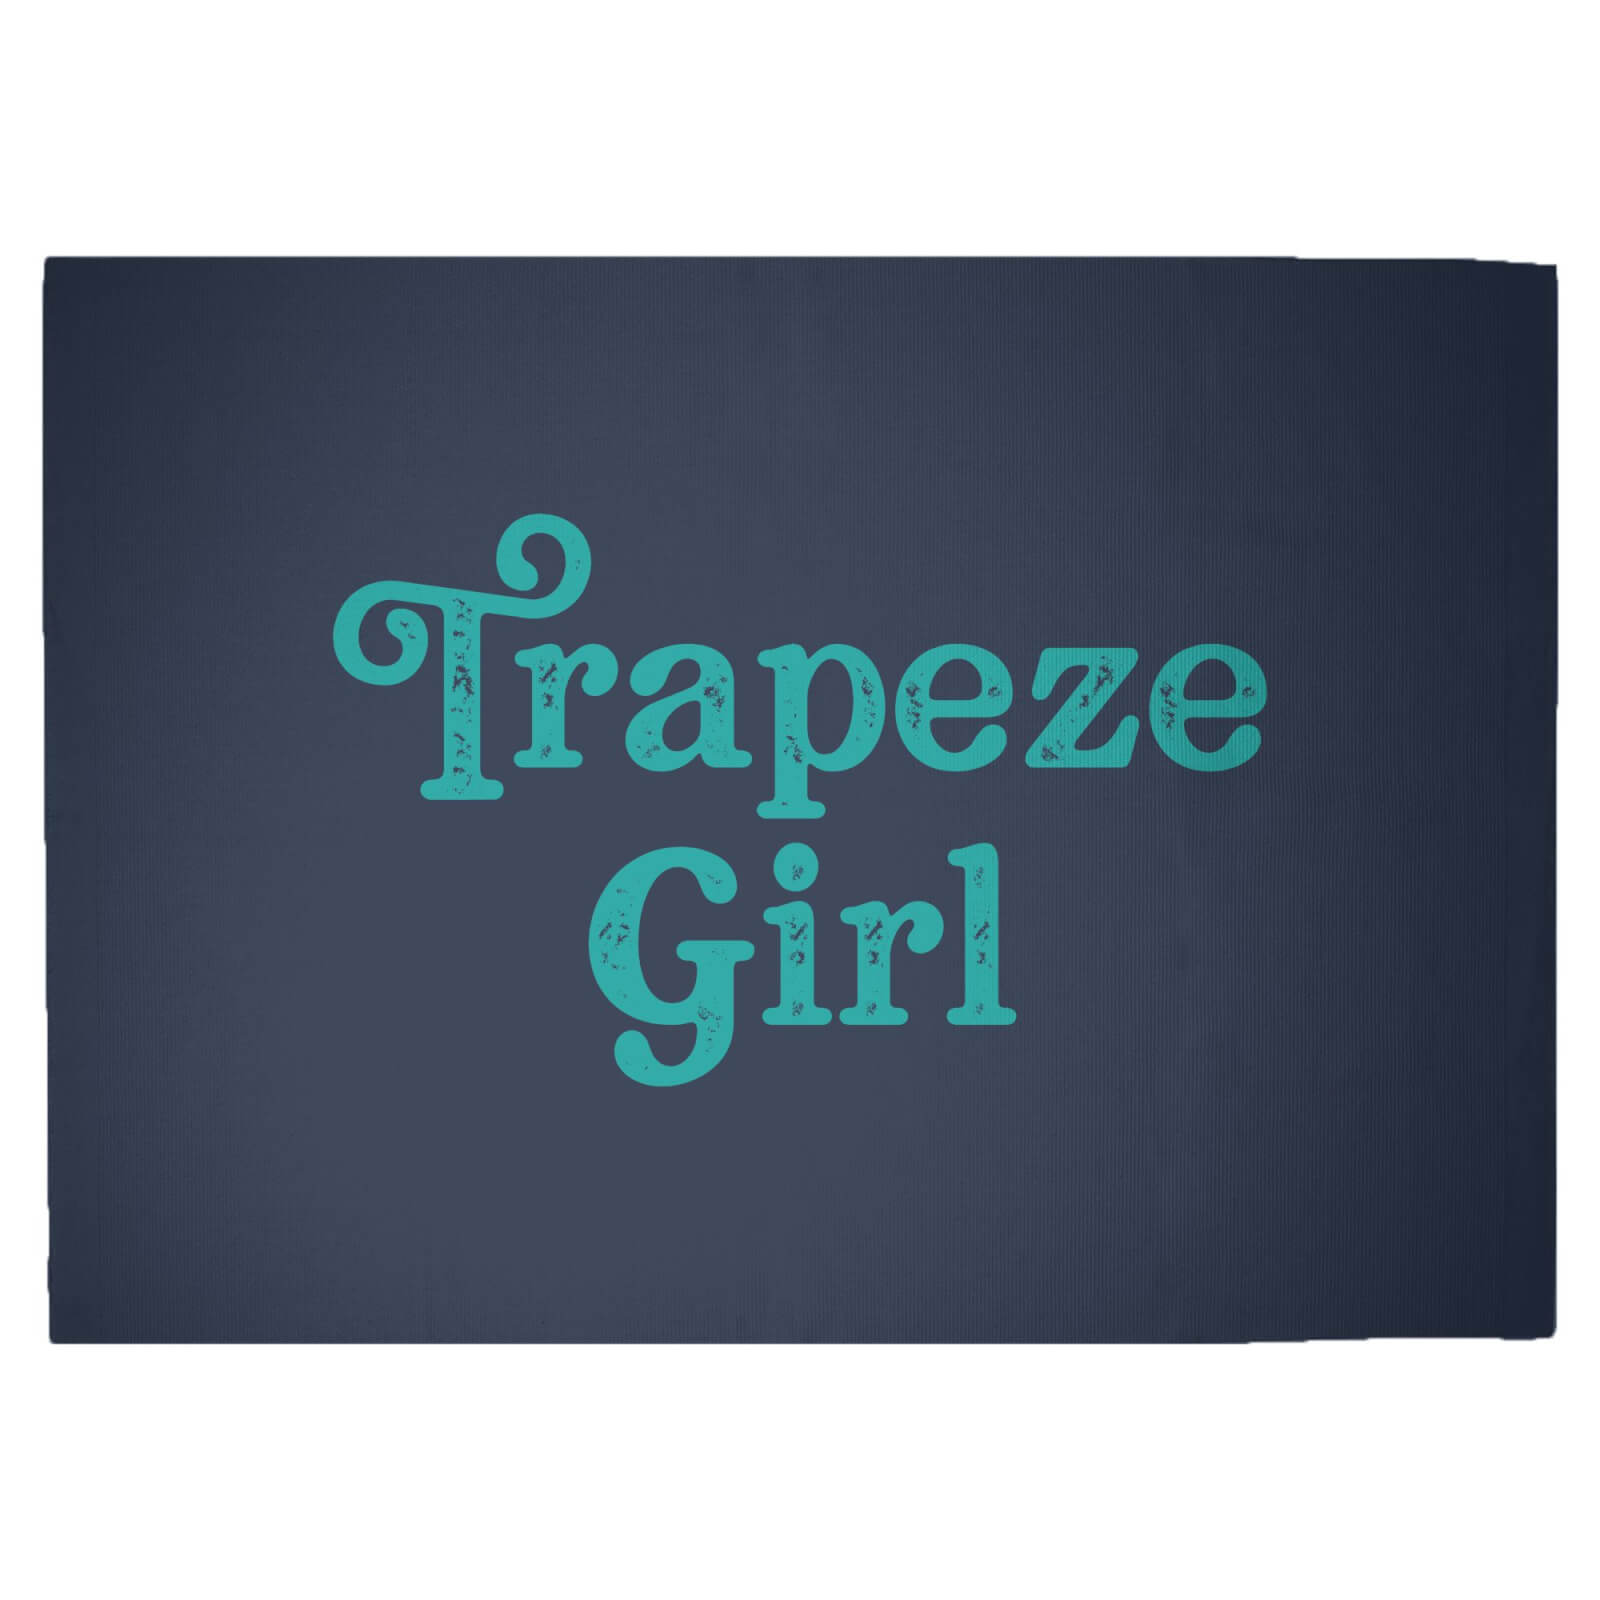 Trapeze Girl Woven Rug - Large